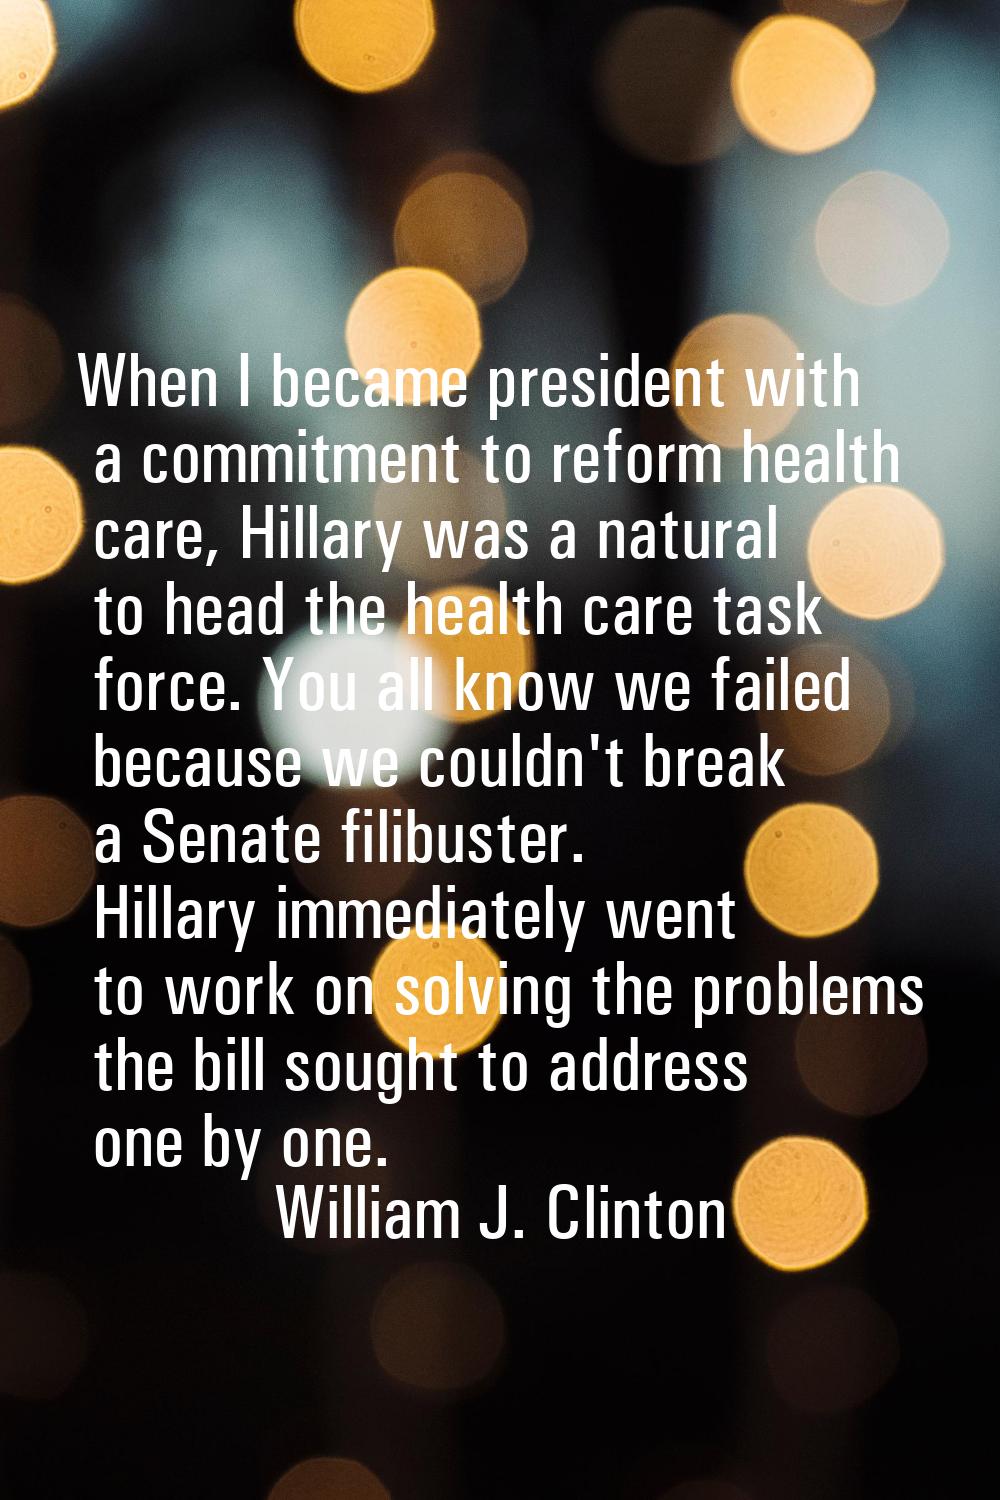 When I became president with a commitment to reform health care, Hillary was a natural to head the 